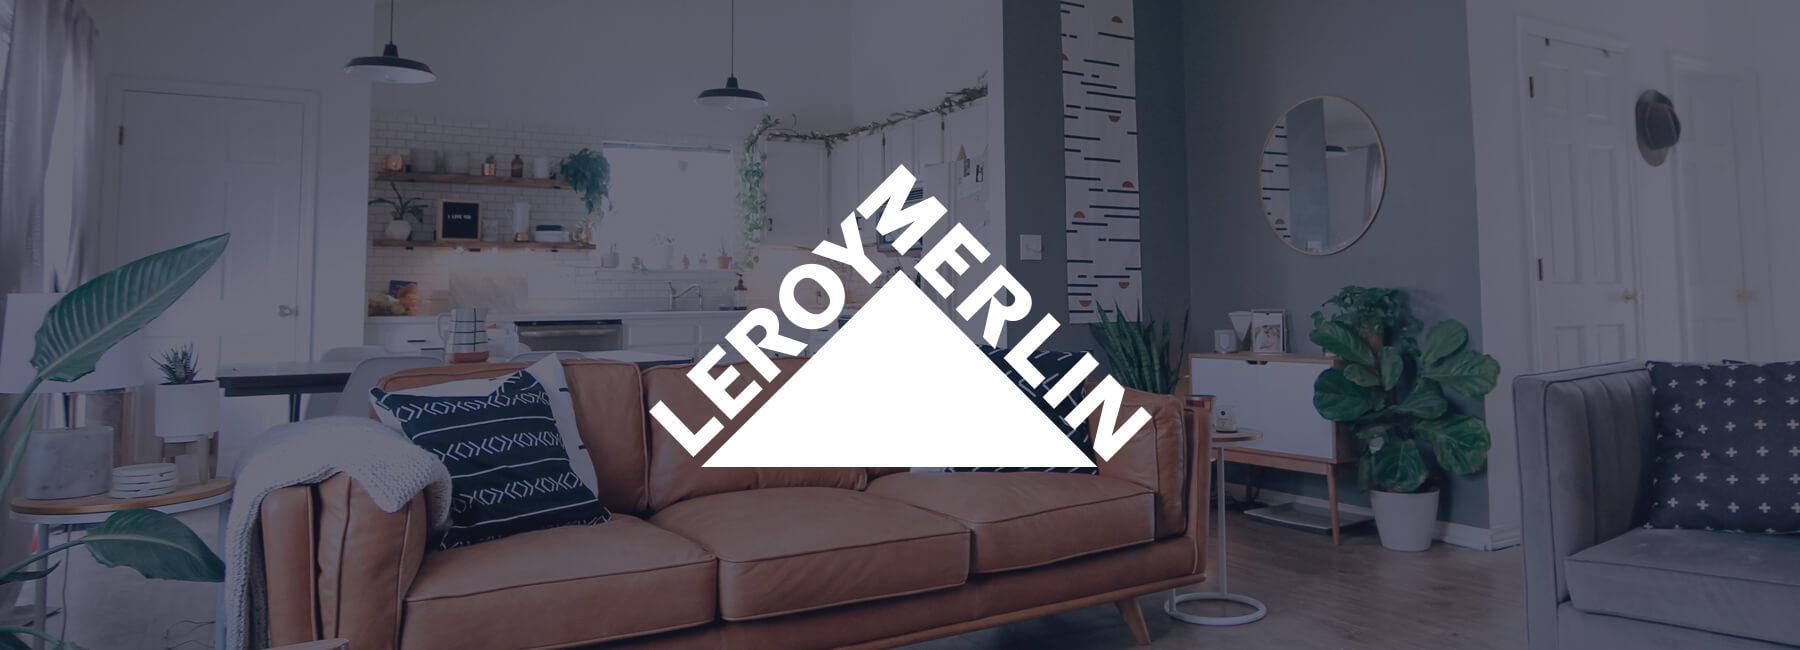 Leroy Merlin boosts conversion rates with Mopinion feedback